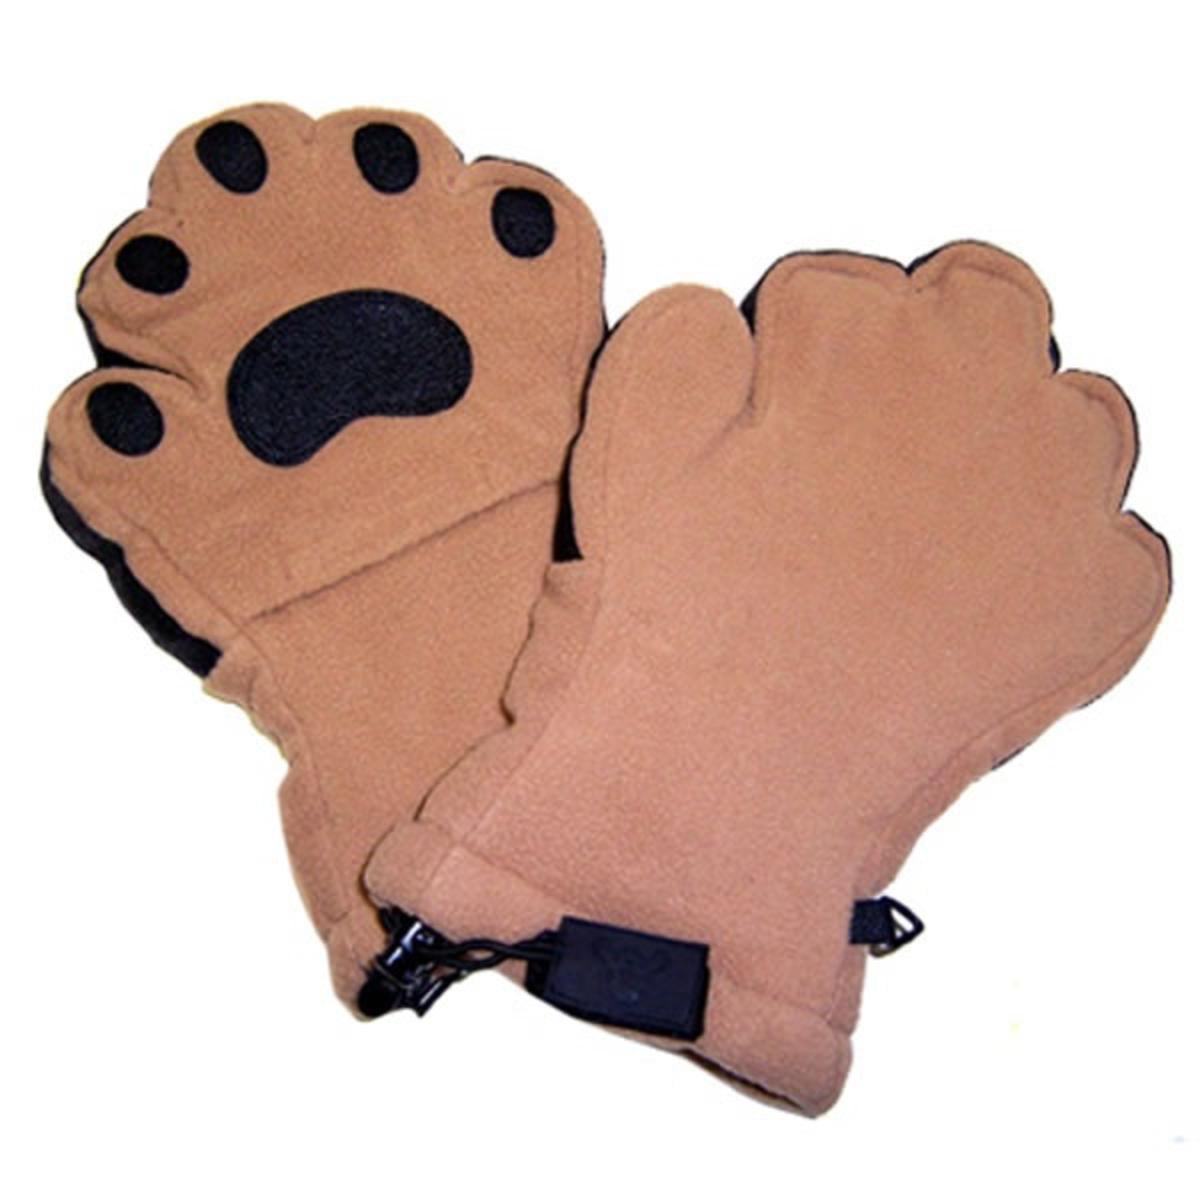 Bear hand. Paw mittens. Paw Gloves.